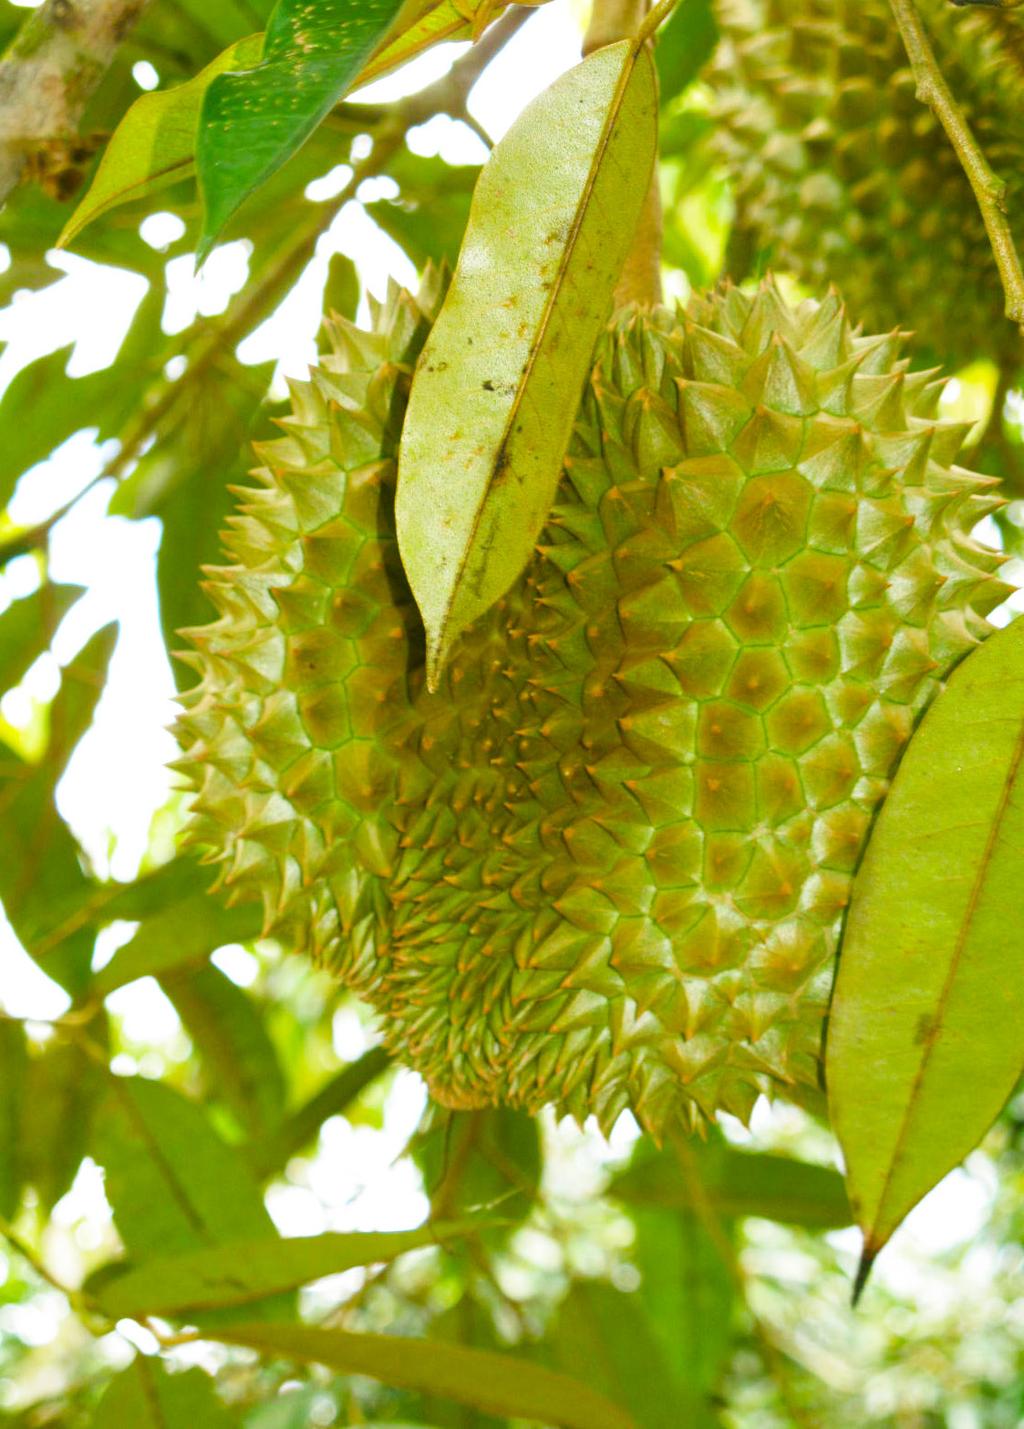 Strangely, durian smells the worst far away and much better when you get closer to it. Once you eat it, you never think about the smell again.